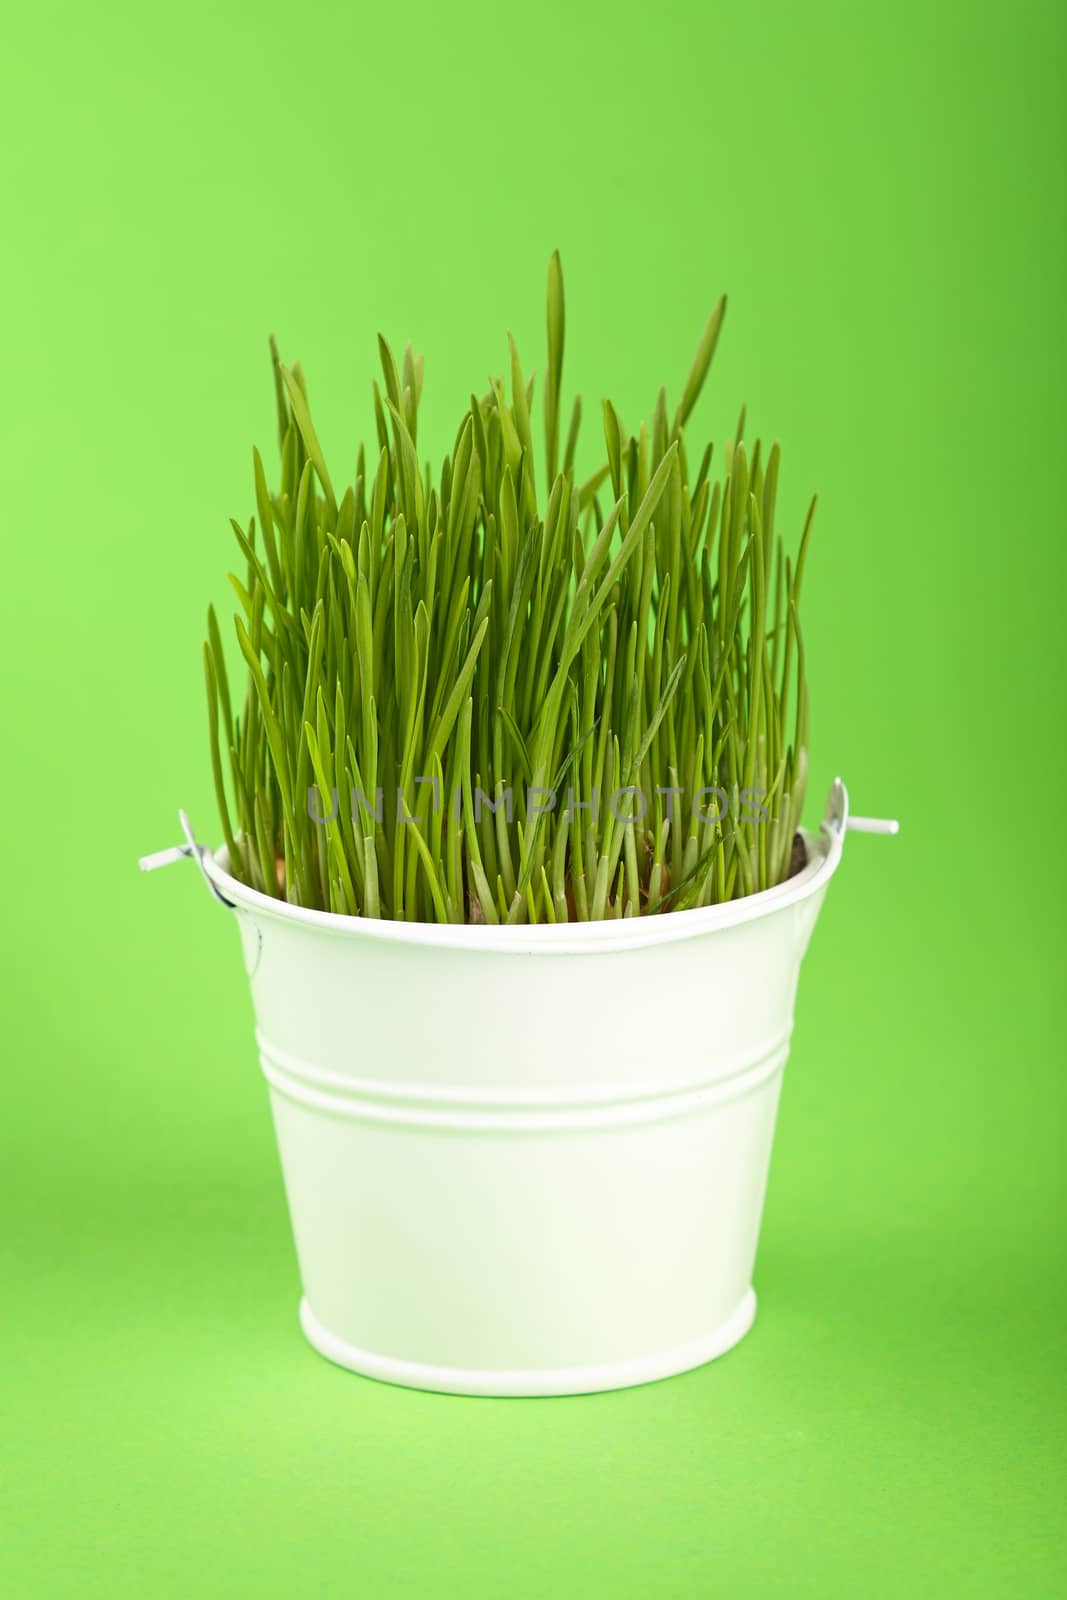 Spring fresh grass growing in small white painted metal bucket, close up over green paper background, low angle side view